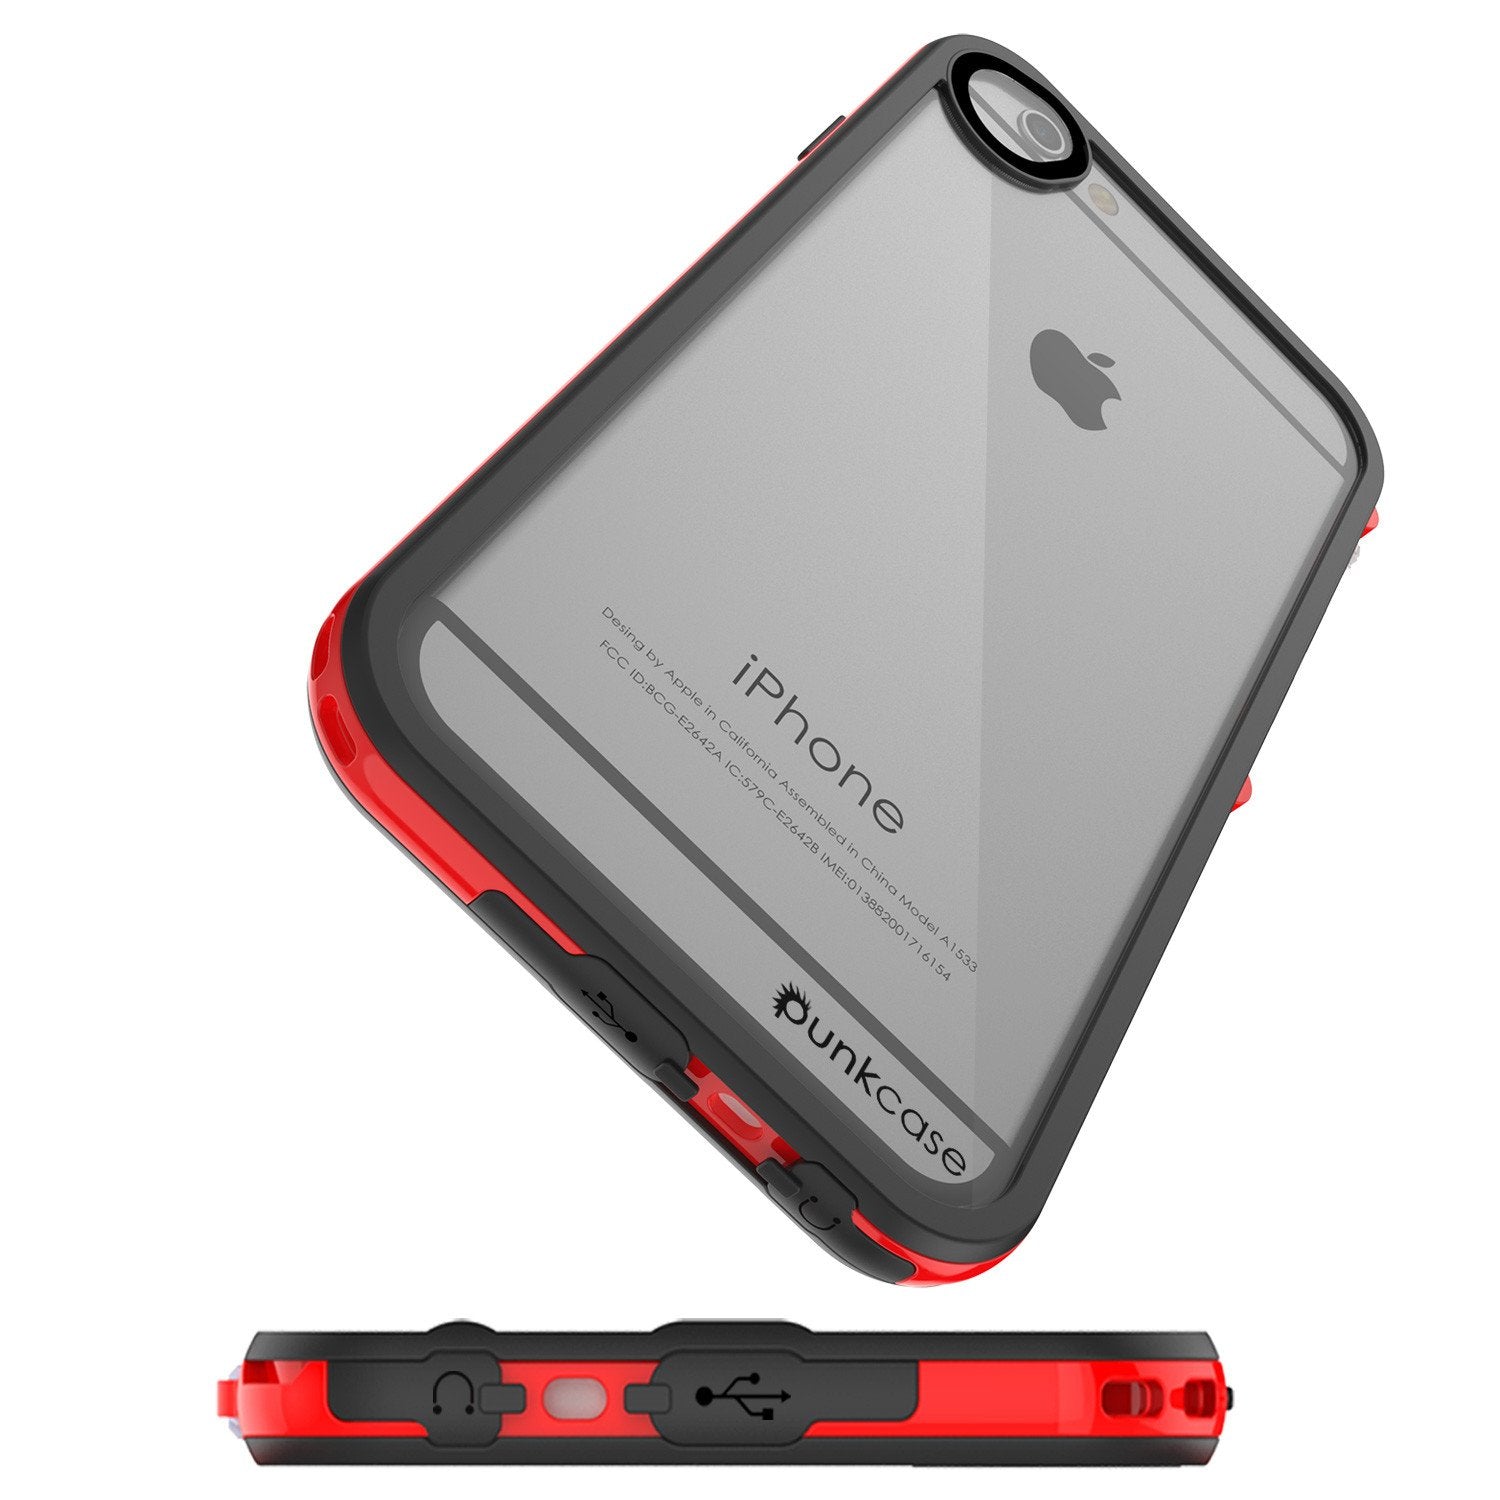 Apple iPhone 7 Waterproof Case, PUNKcase CRYSTAL 2.0 Red W/ Attached Screen Protector  | Warranty - PunkCase NZ